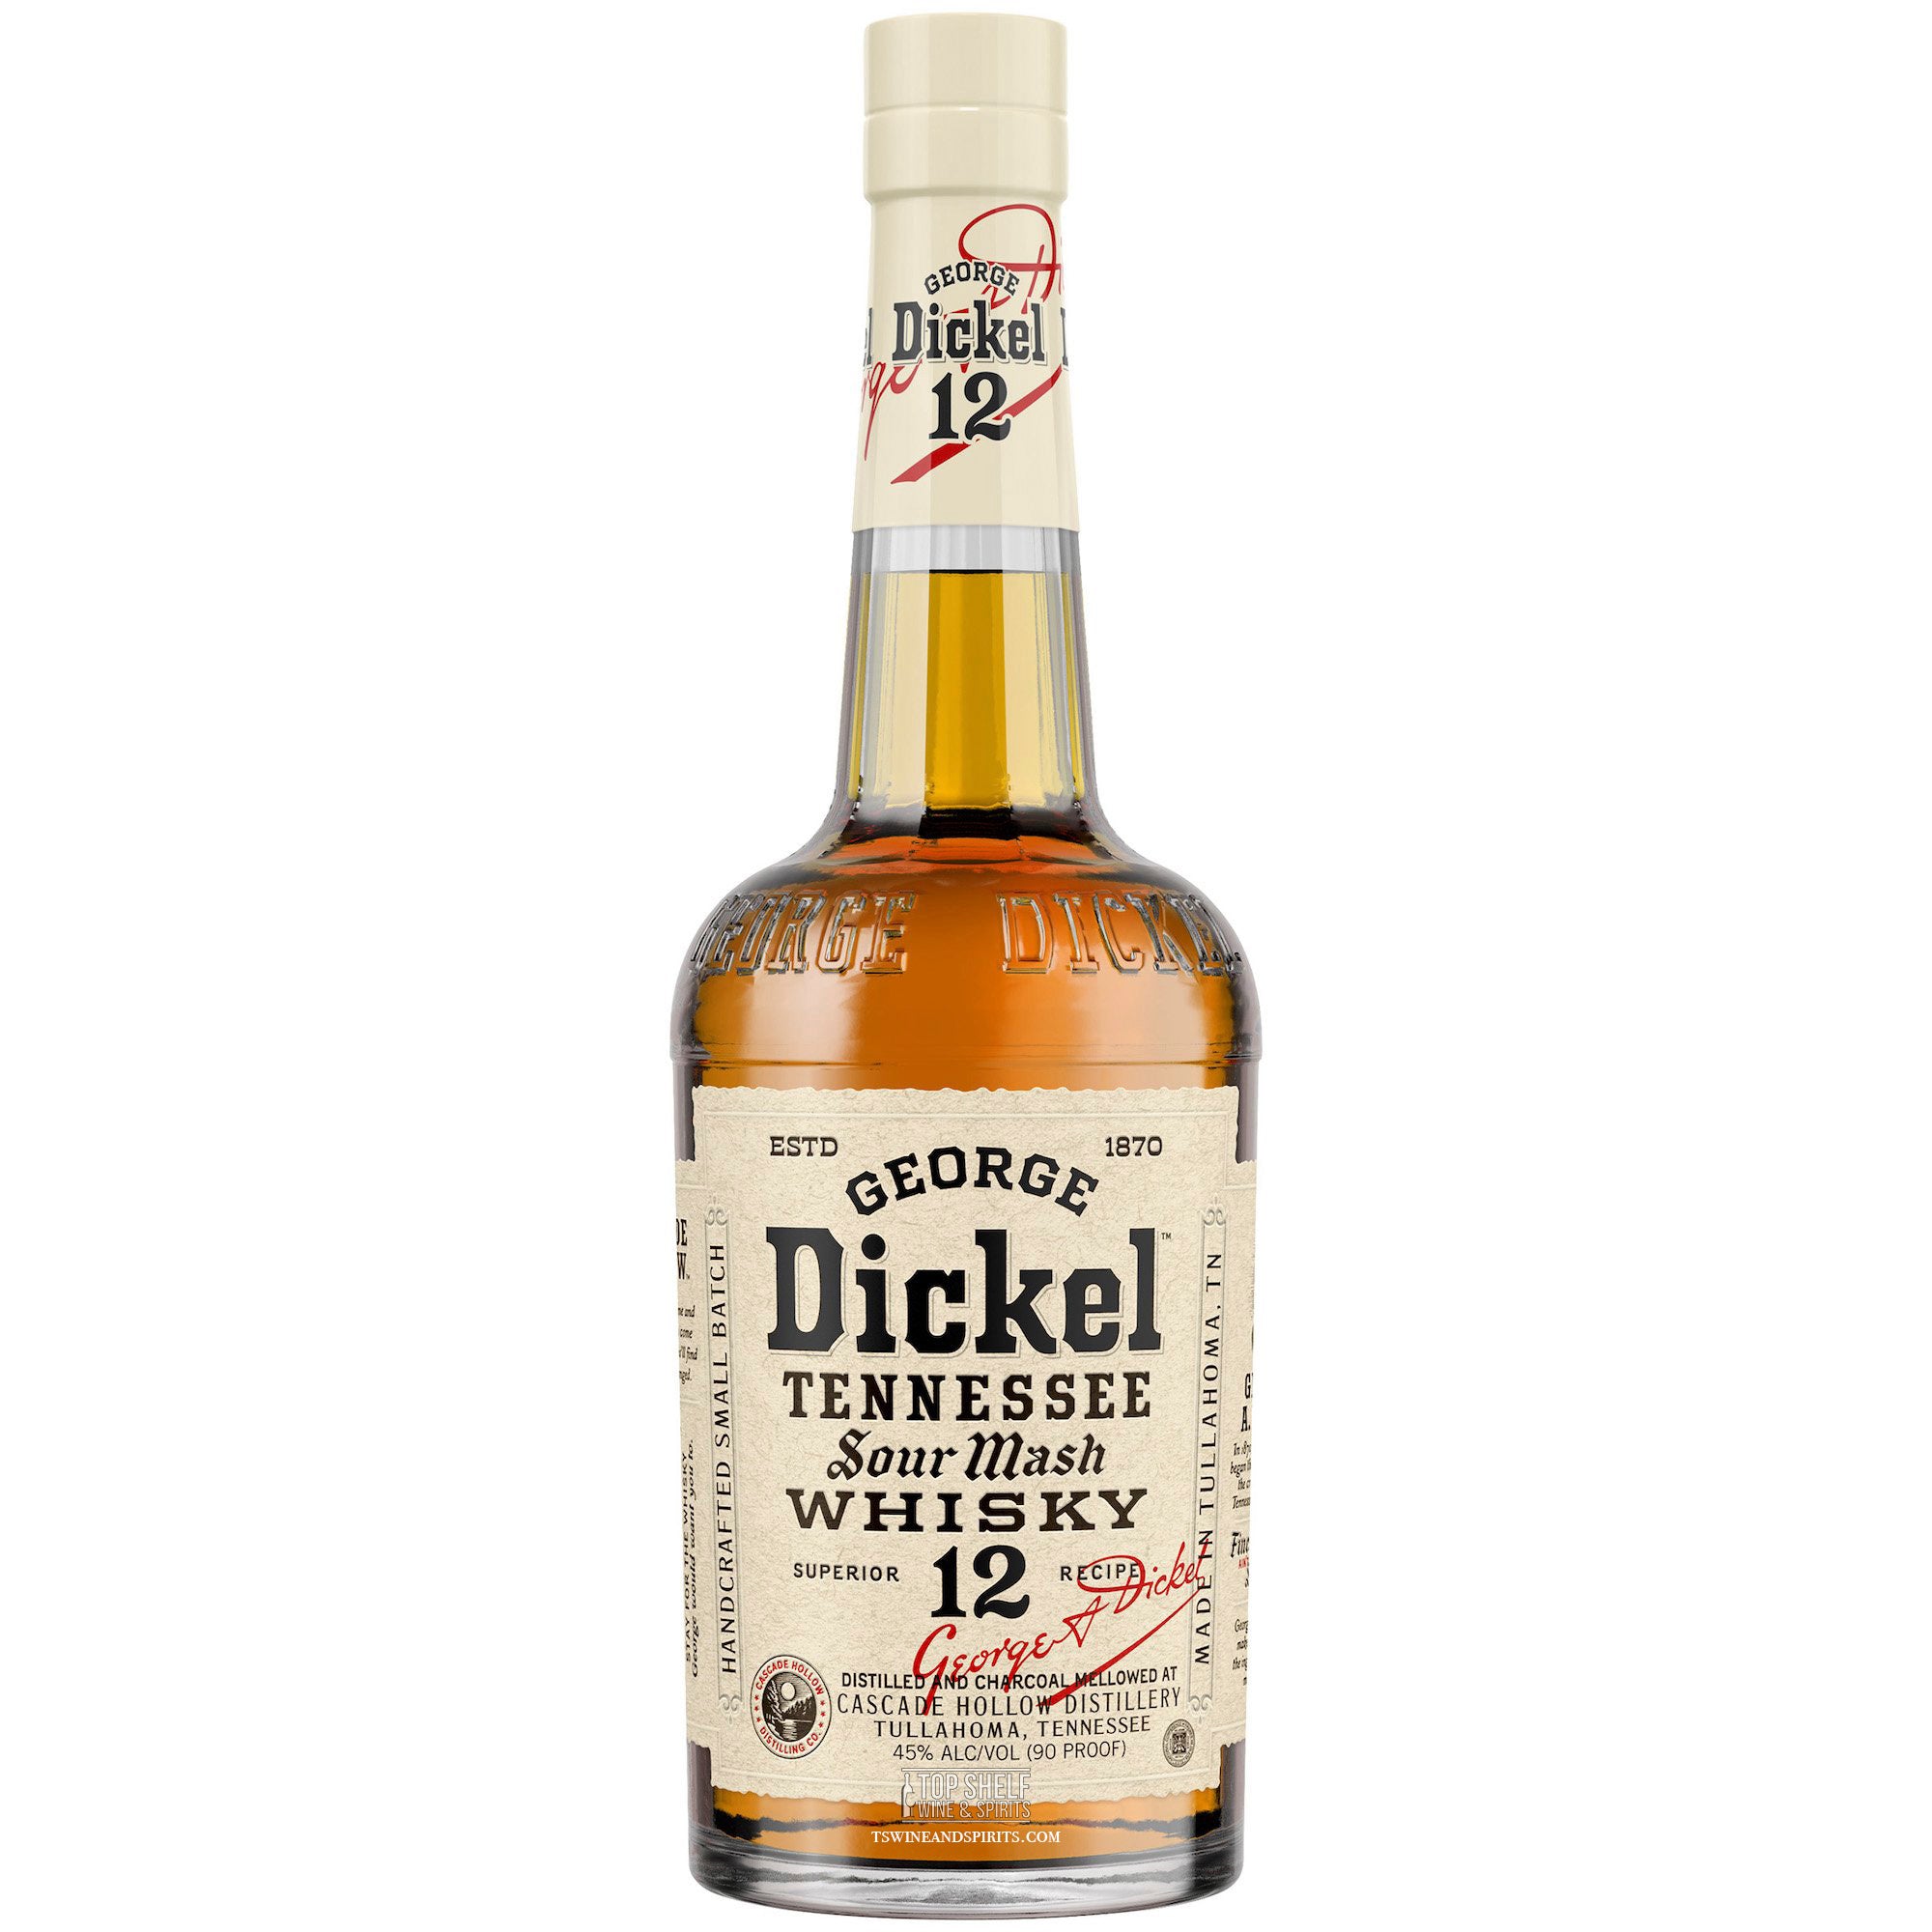 George Dickel Tennessee Sour Mash No. 12